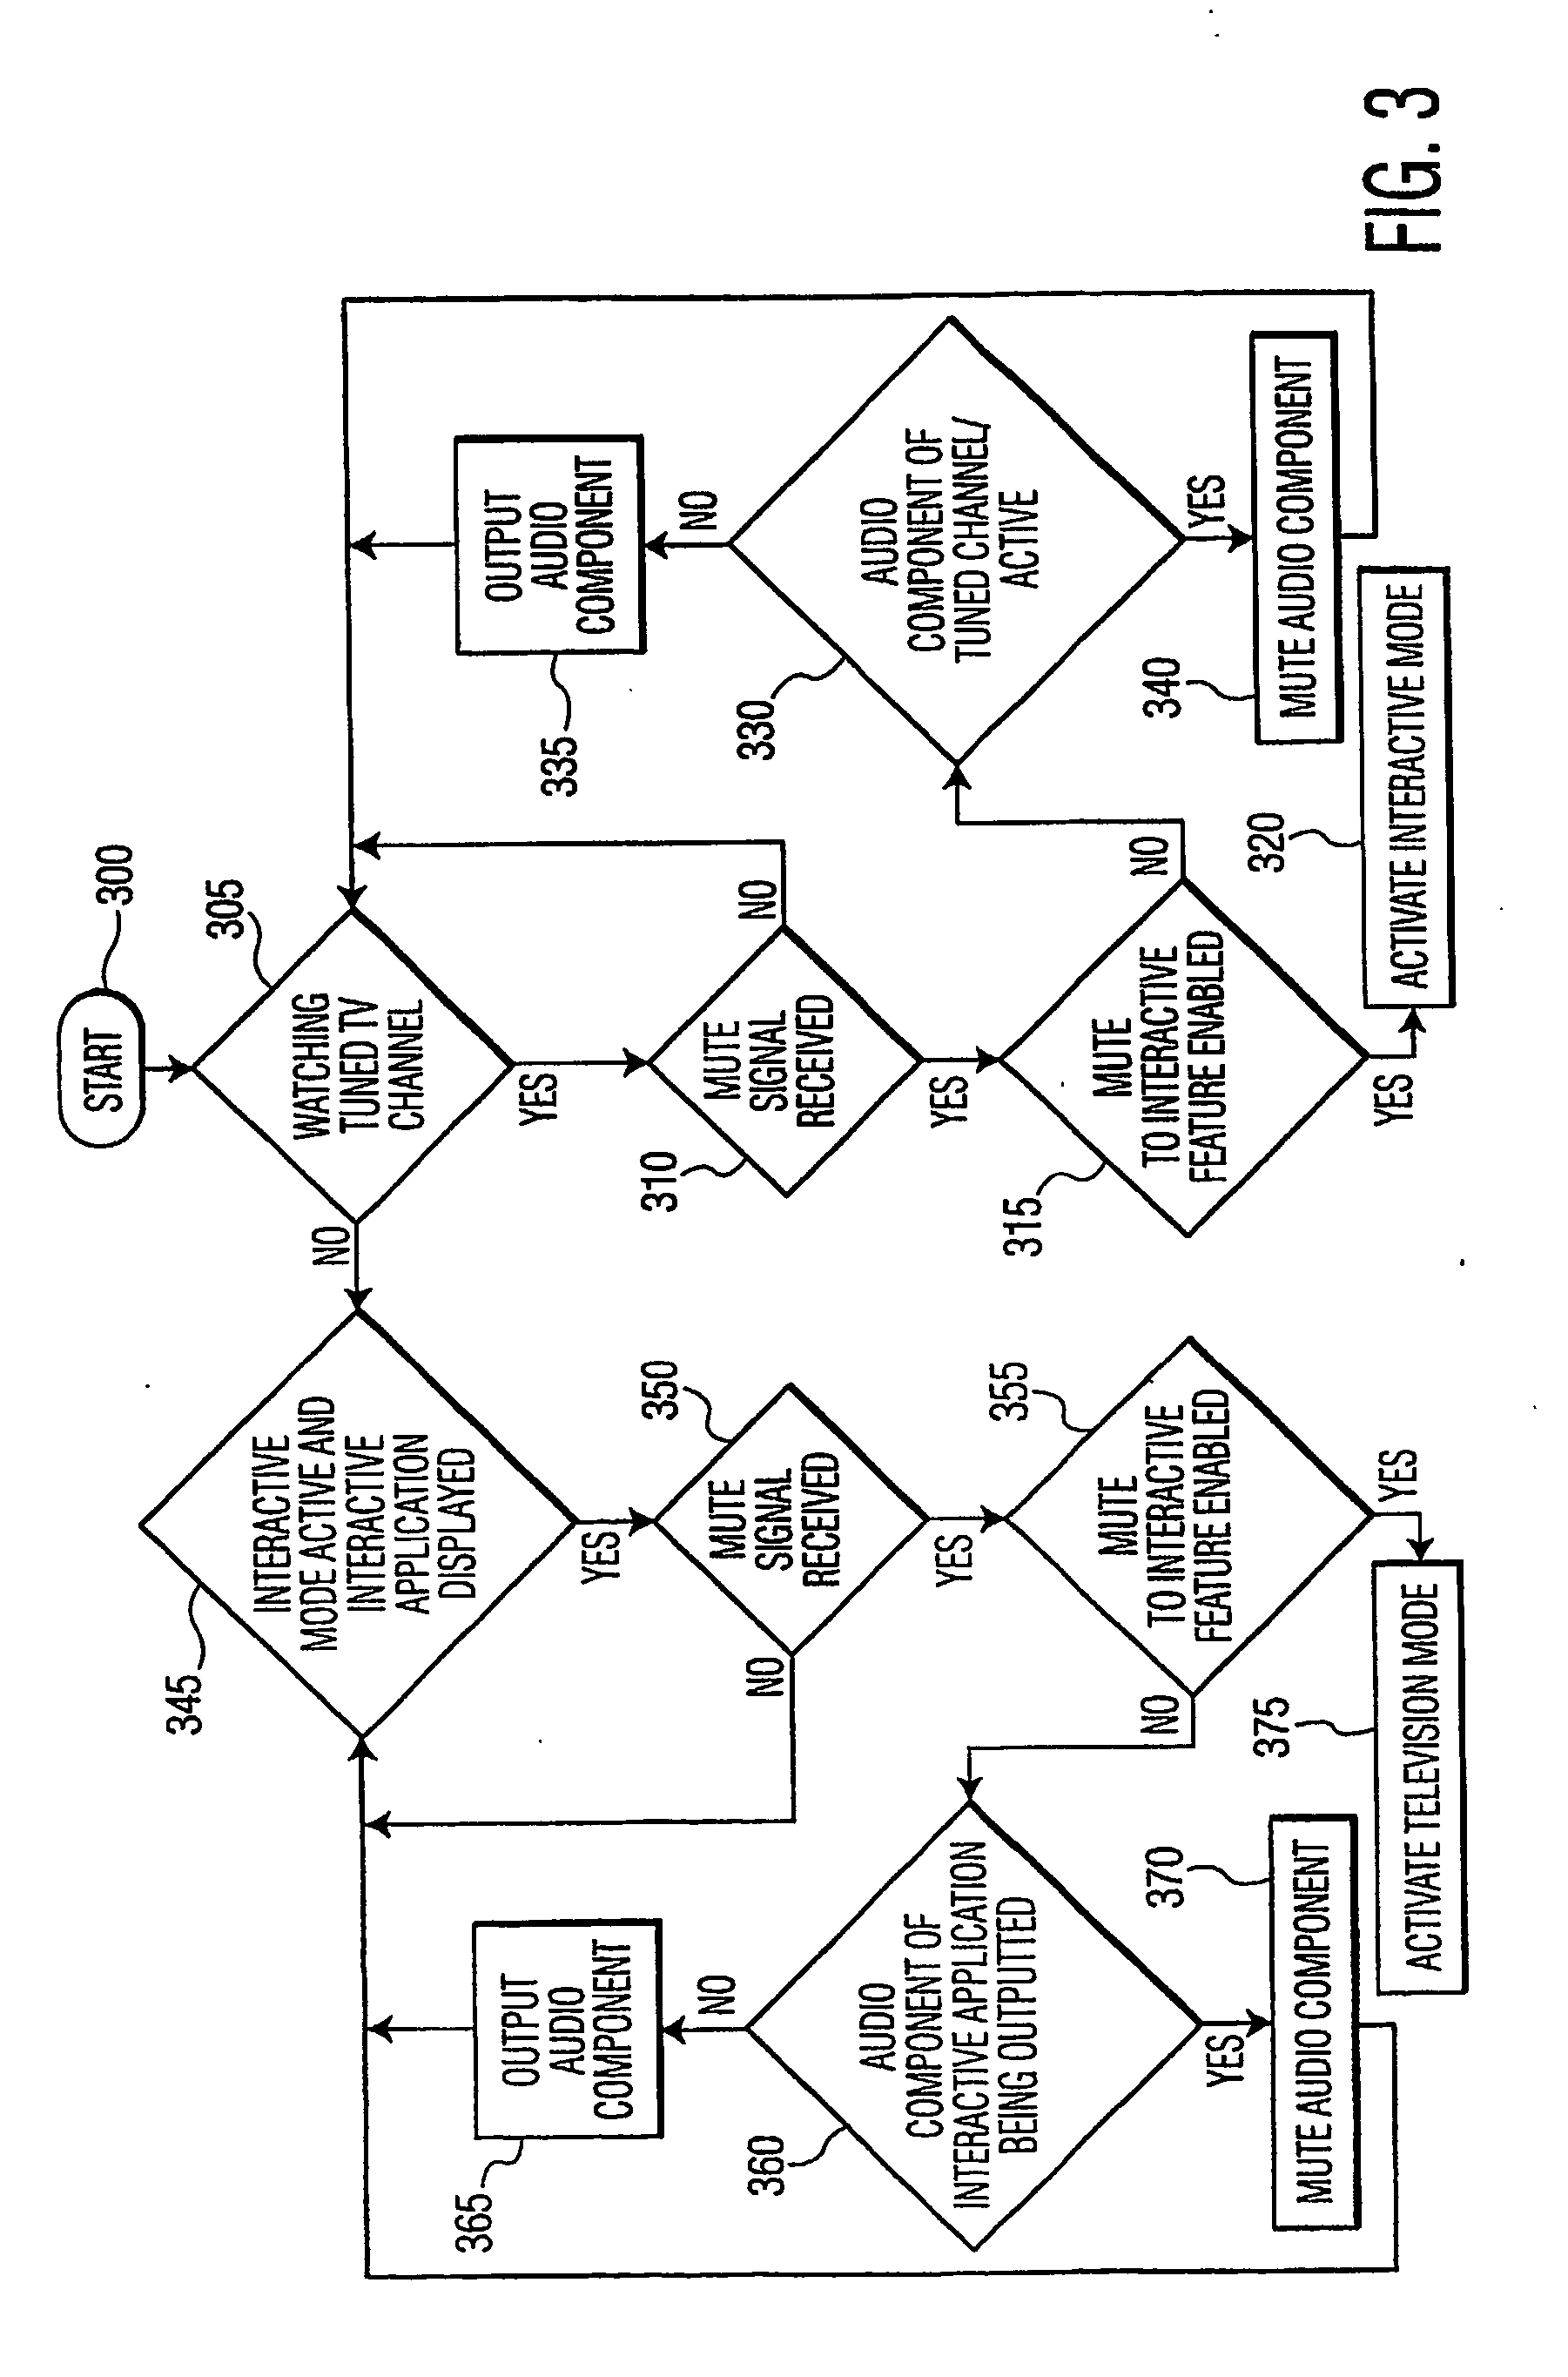 Apparatus and method for switching between an interactive mode and a television program mode